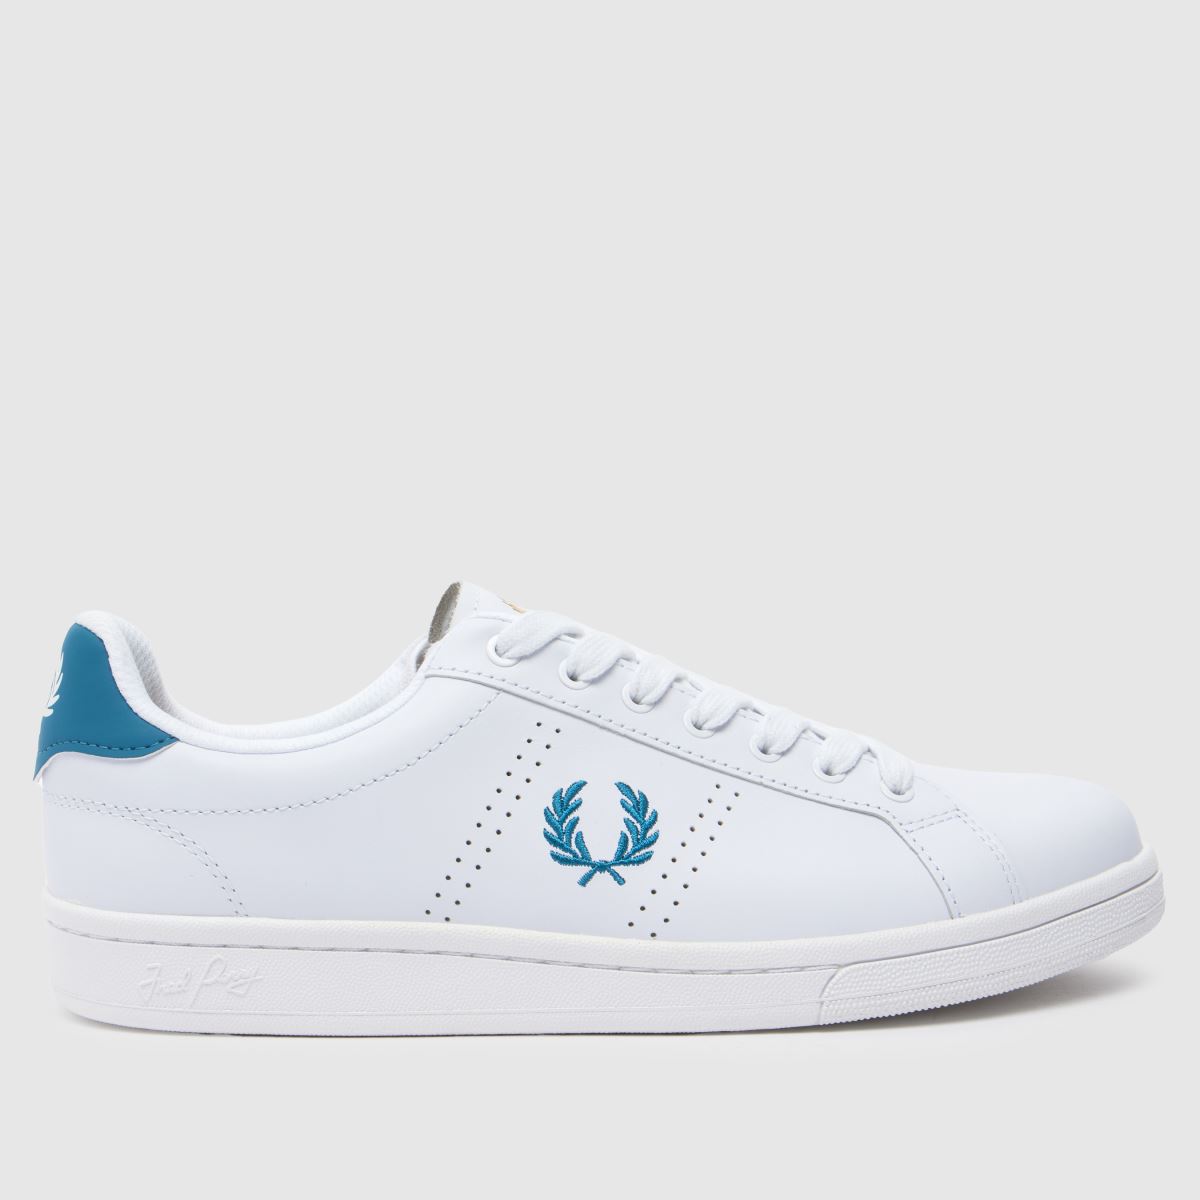 Fred Perry b721 trainers in white & pl blue